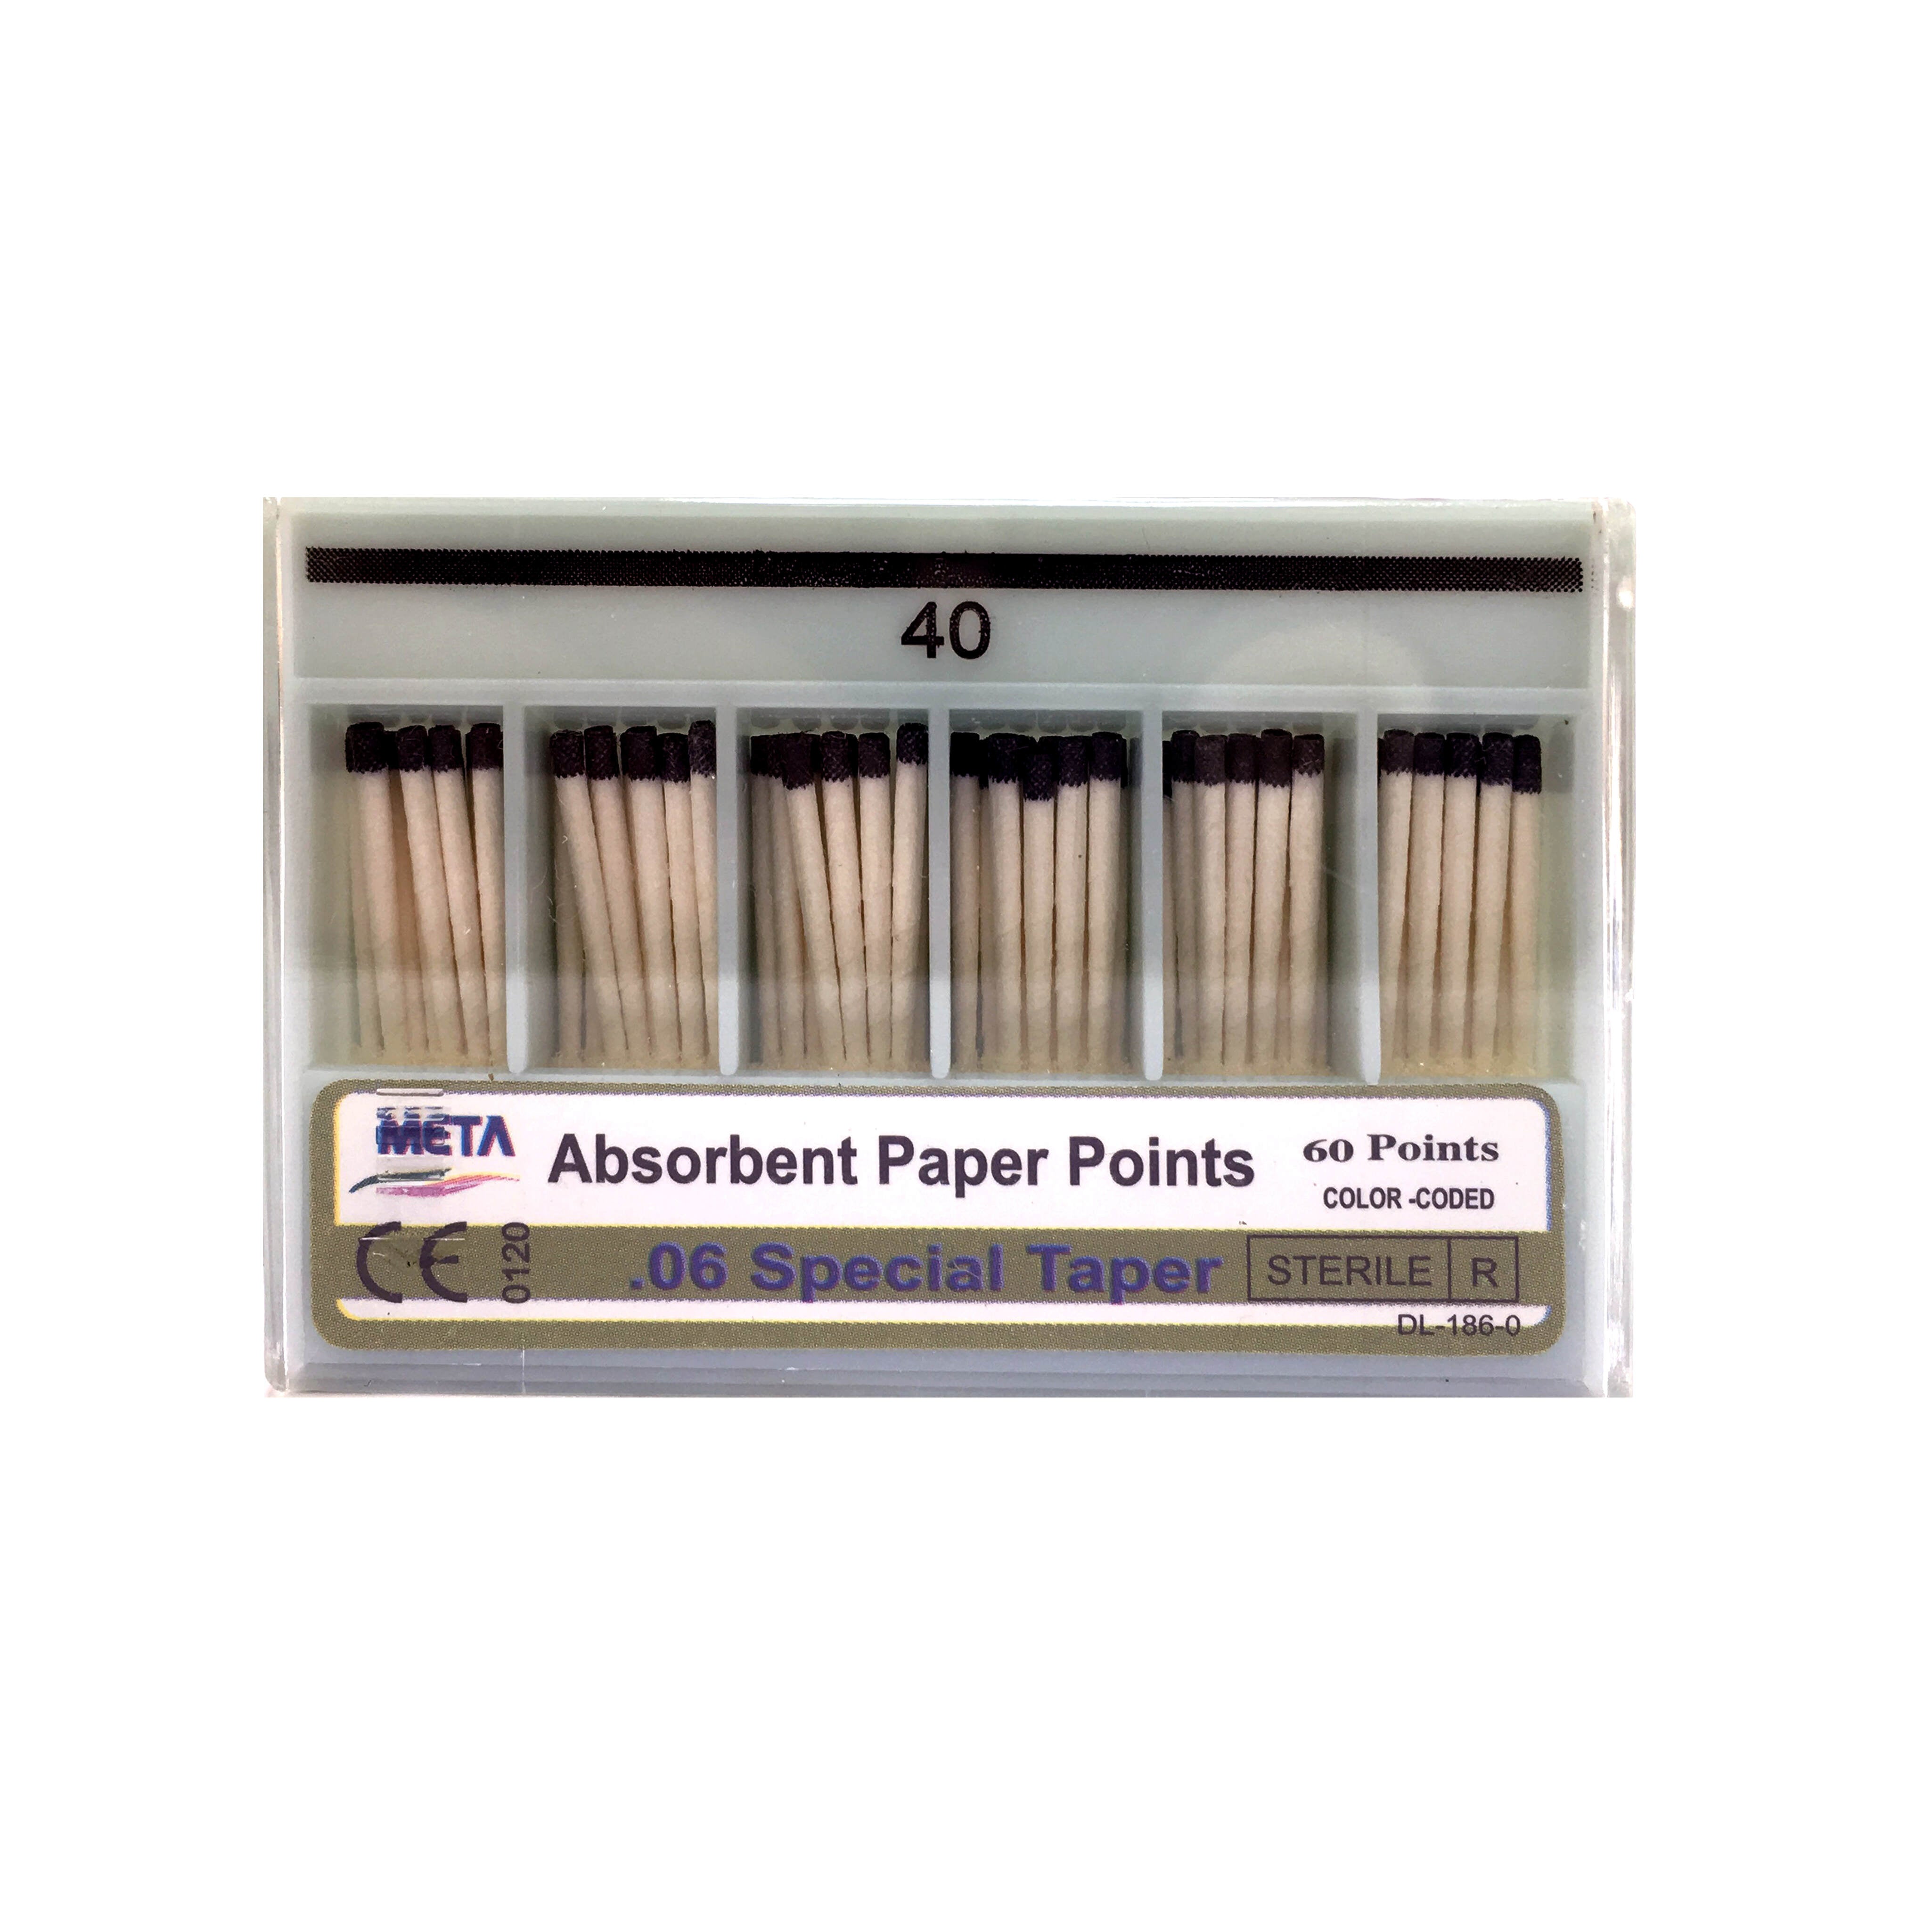 .06 Taper Absorbent Paperpoints - Spillproof Slide Box